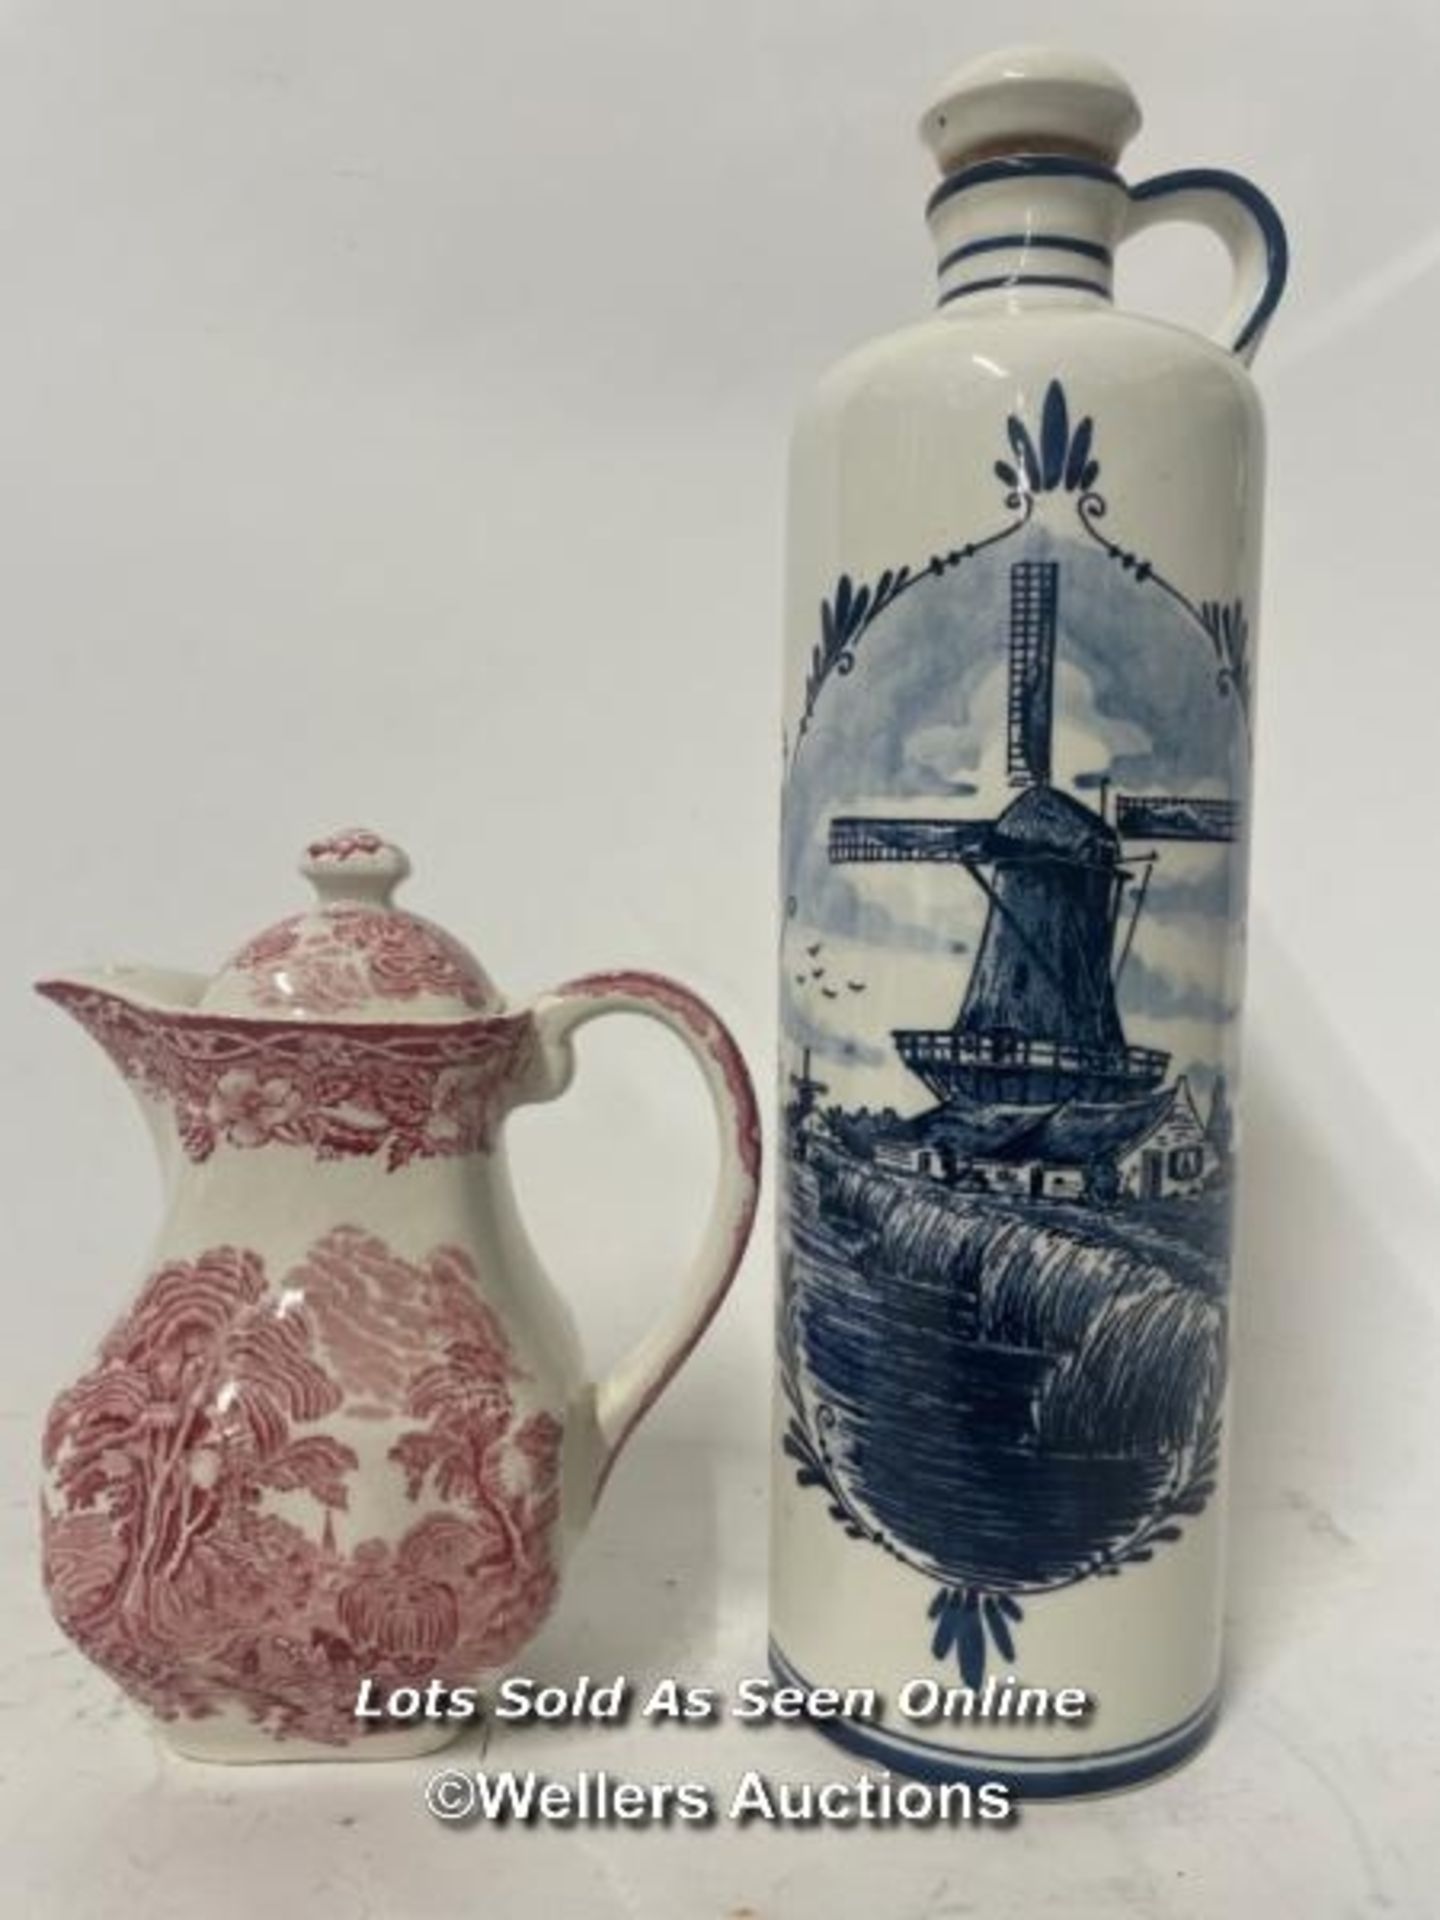 Delft lidded bottle and Wedgewood Enoch jug, both in good condition / AN8